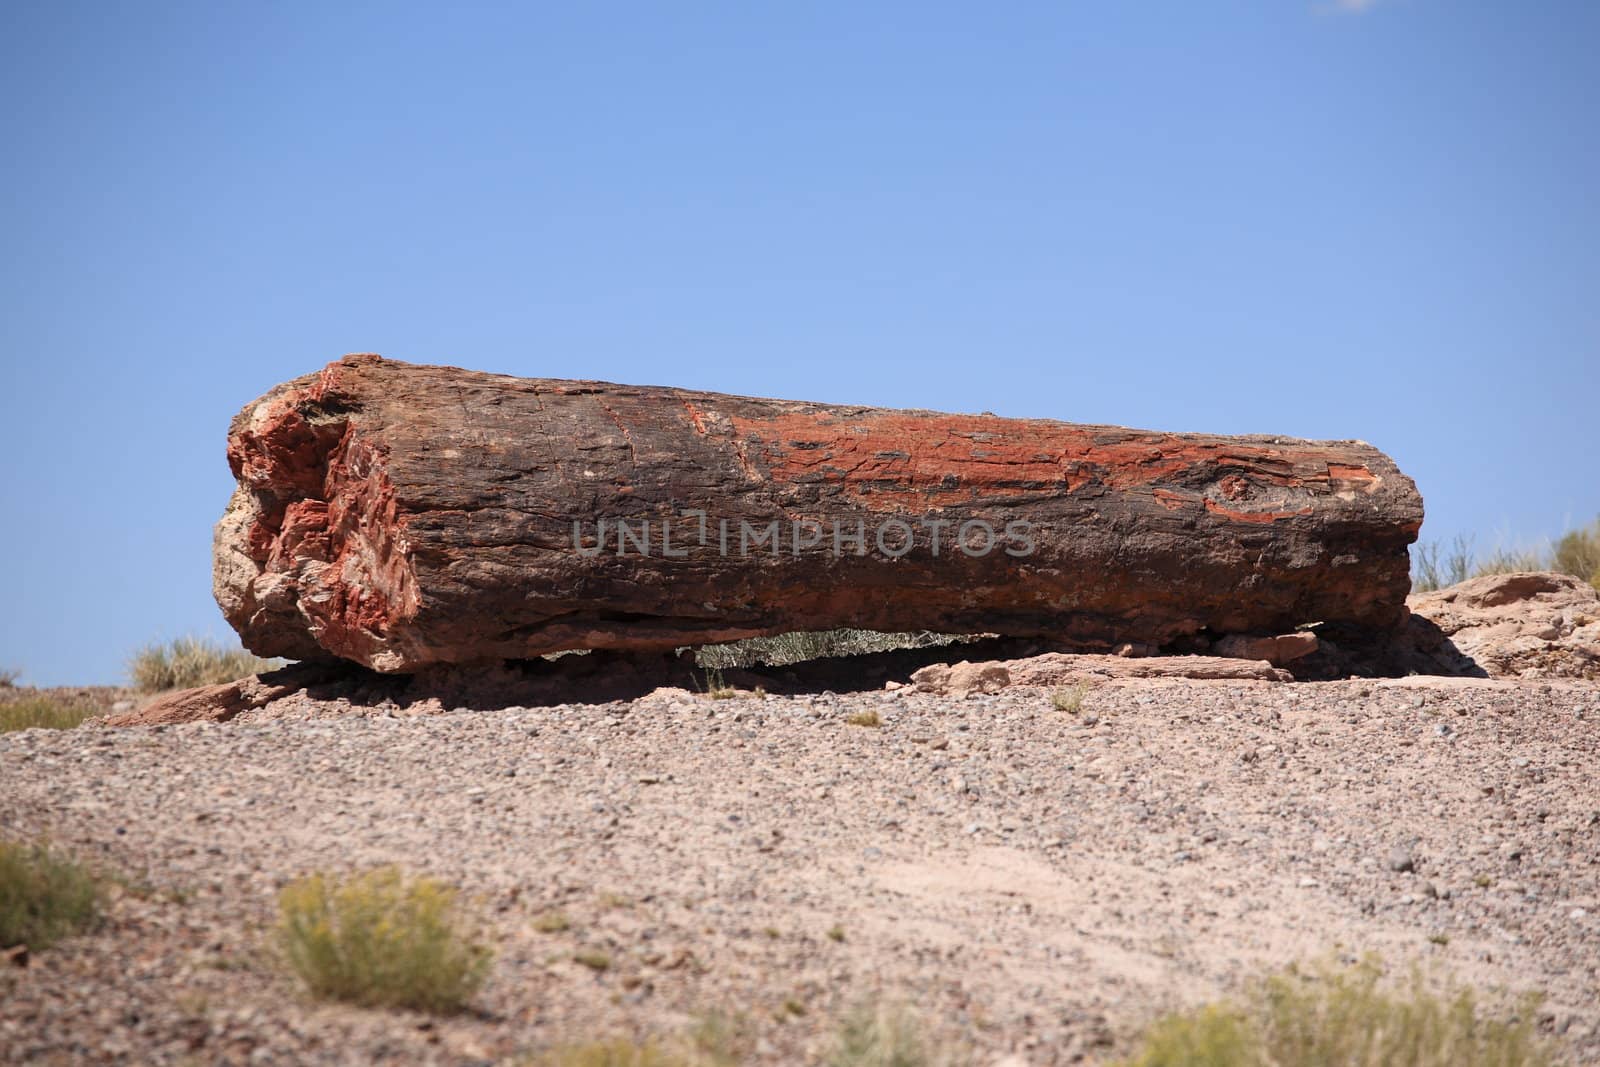 Fossilized log in the Petrified Forest National Park